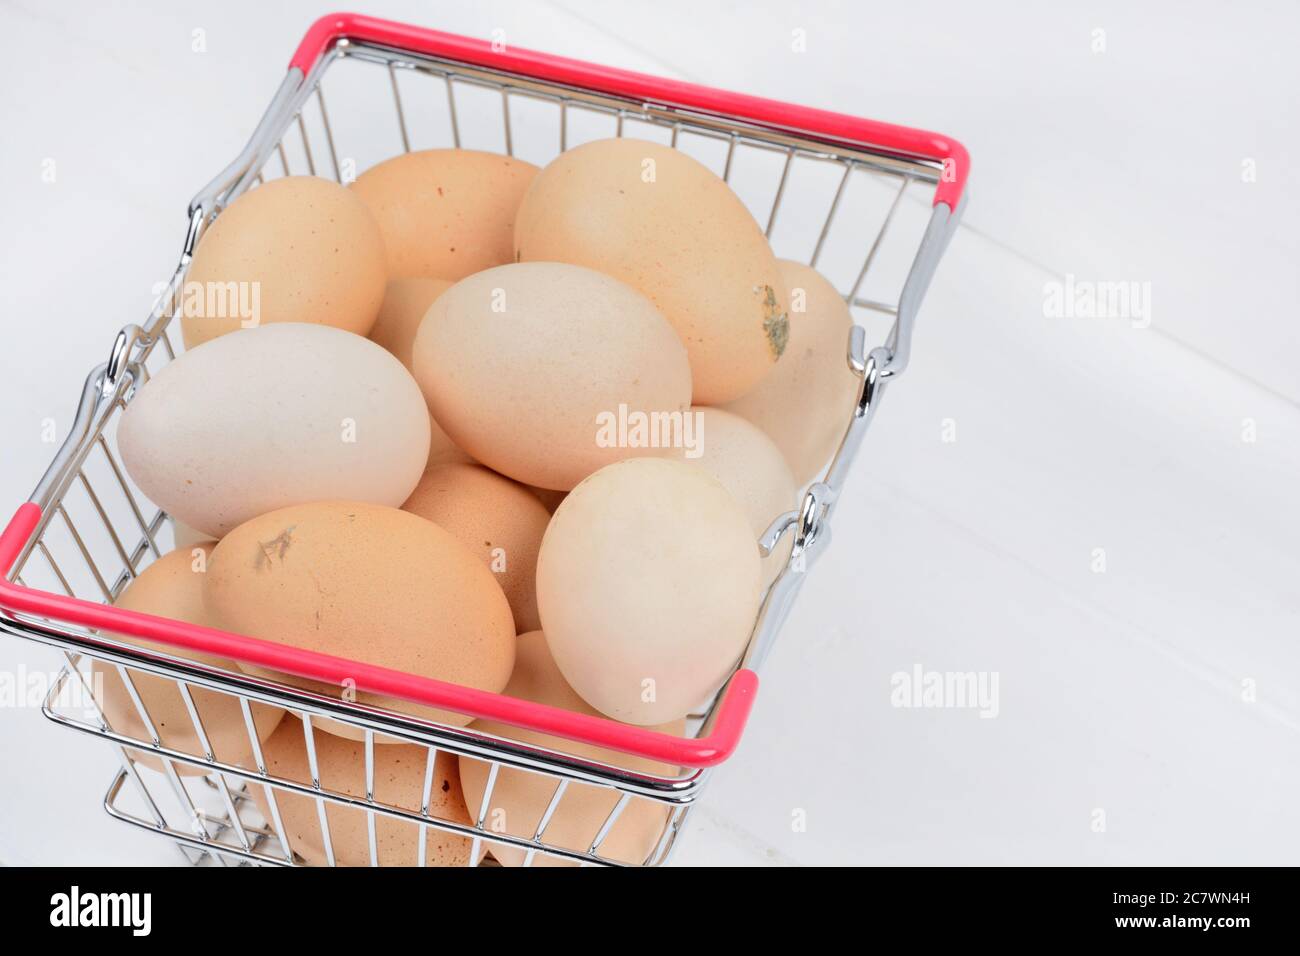 Many eggs in a shopping cart on a wood table close up Stock Photo